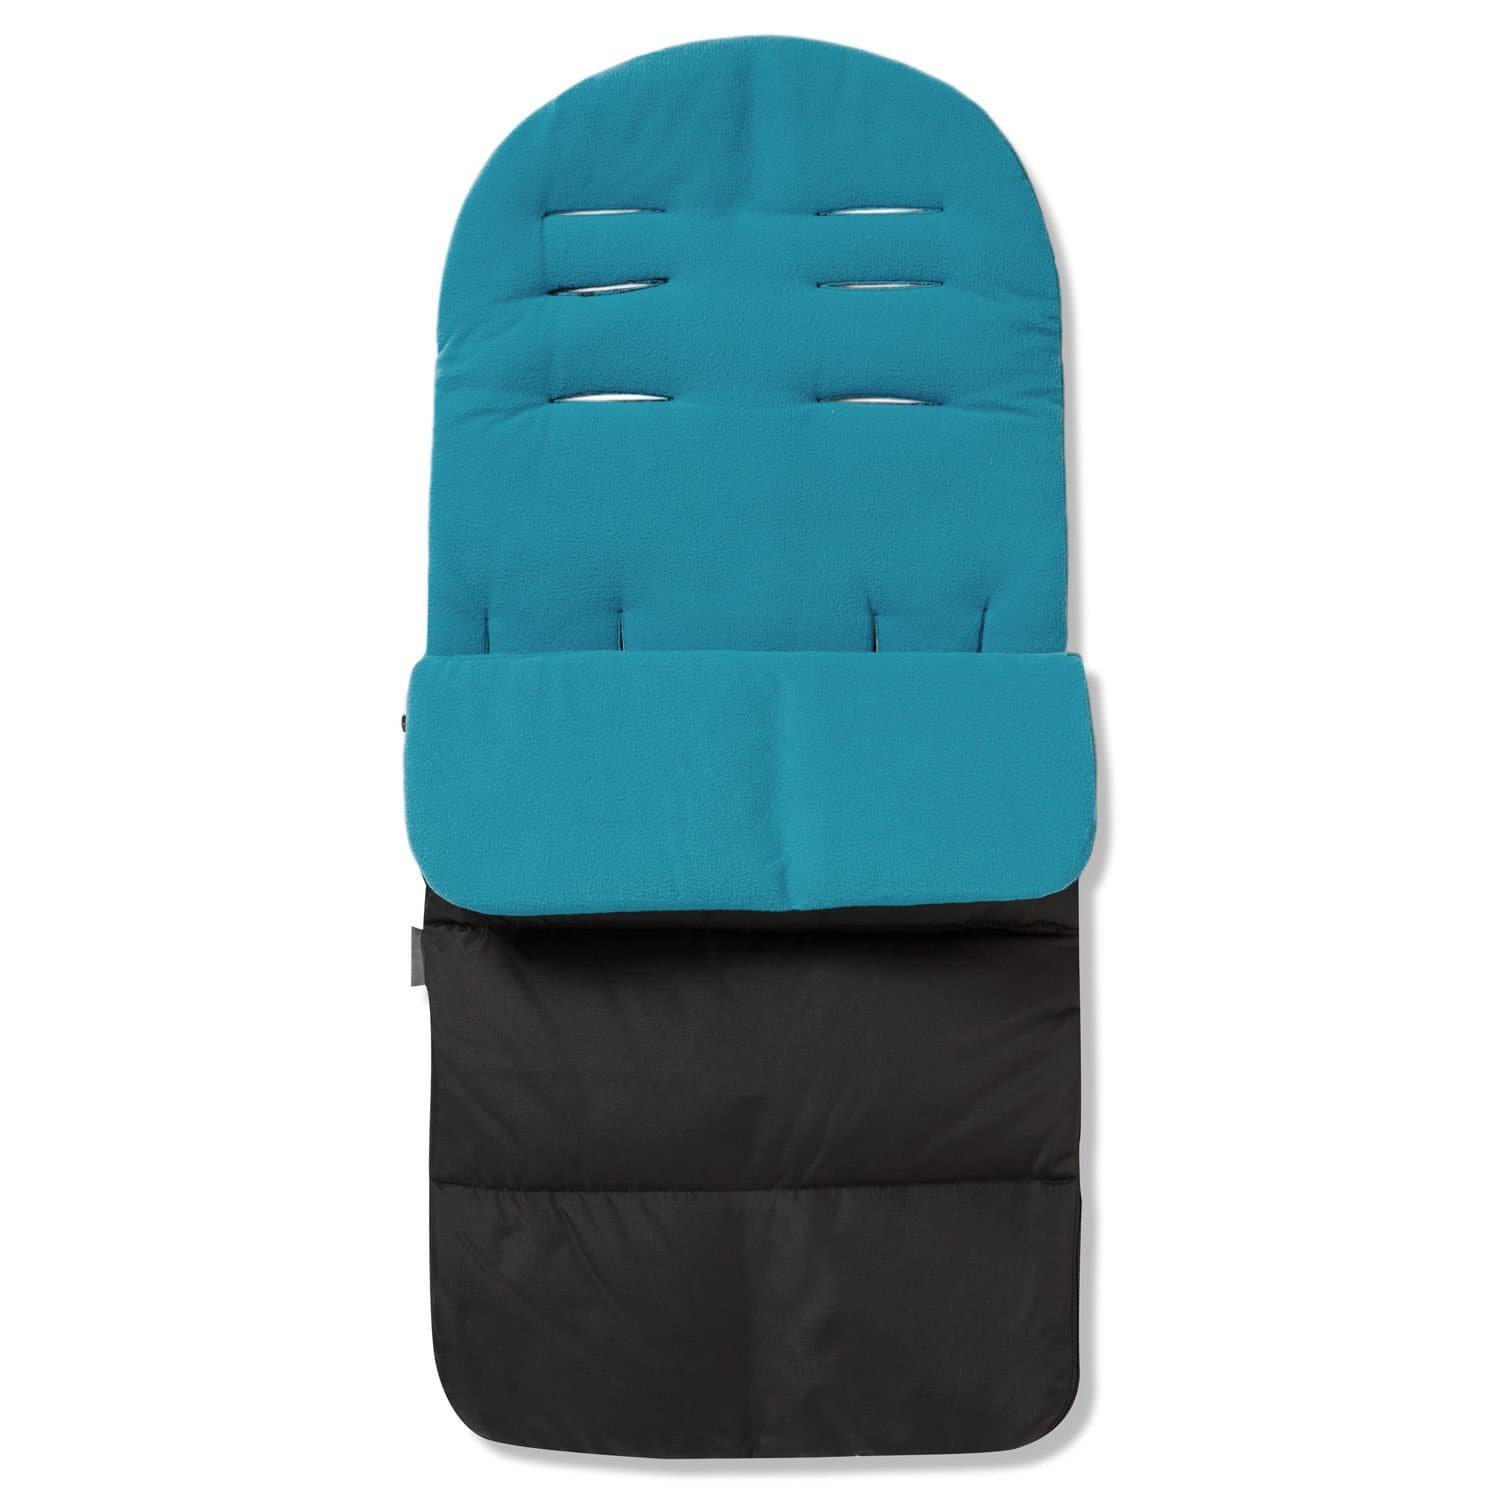 Premium Footmuff / Cosy Toes Compatible with I'coo - Ocean Blue / Fits All Models | For Your Little One